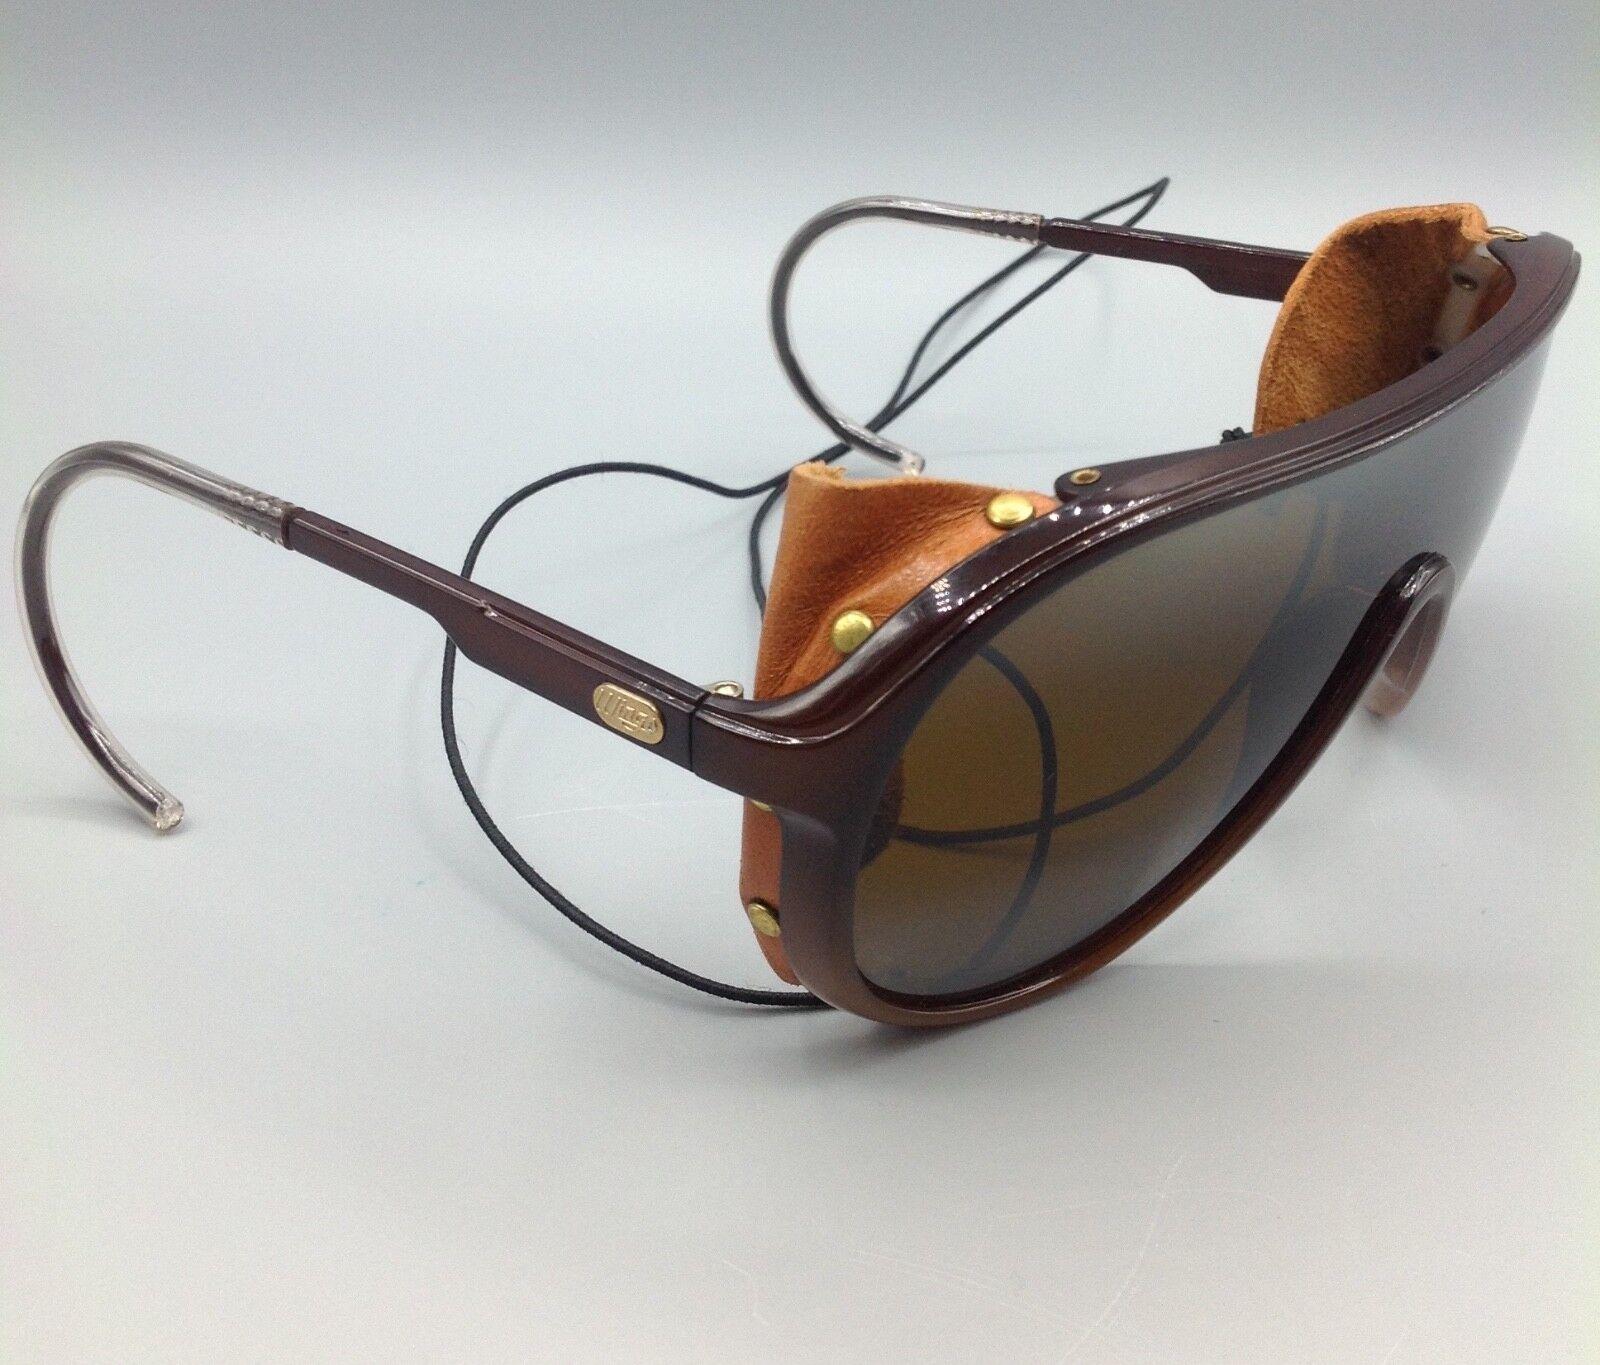 RAY BAN Wings Bausch&Lomb B&L frame sunglasses lunettes occhiale da sole